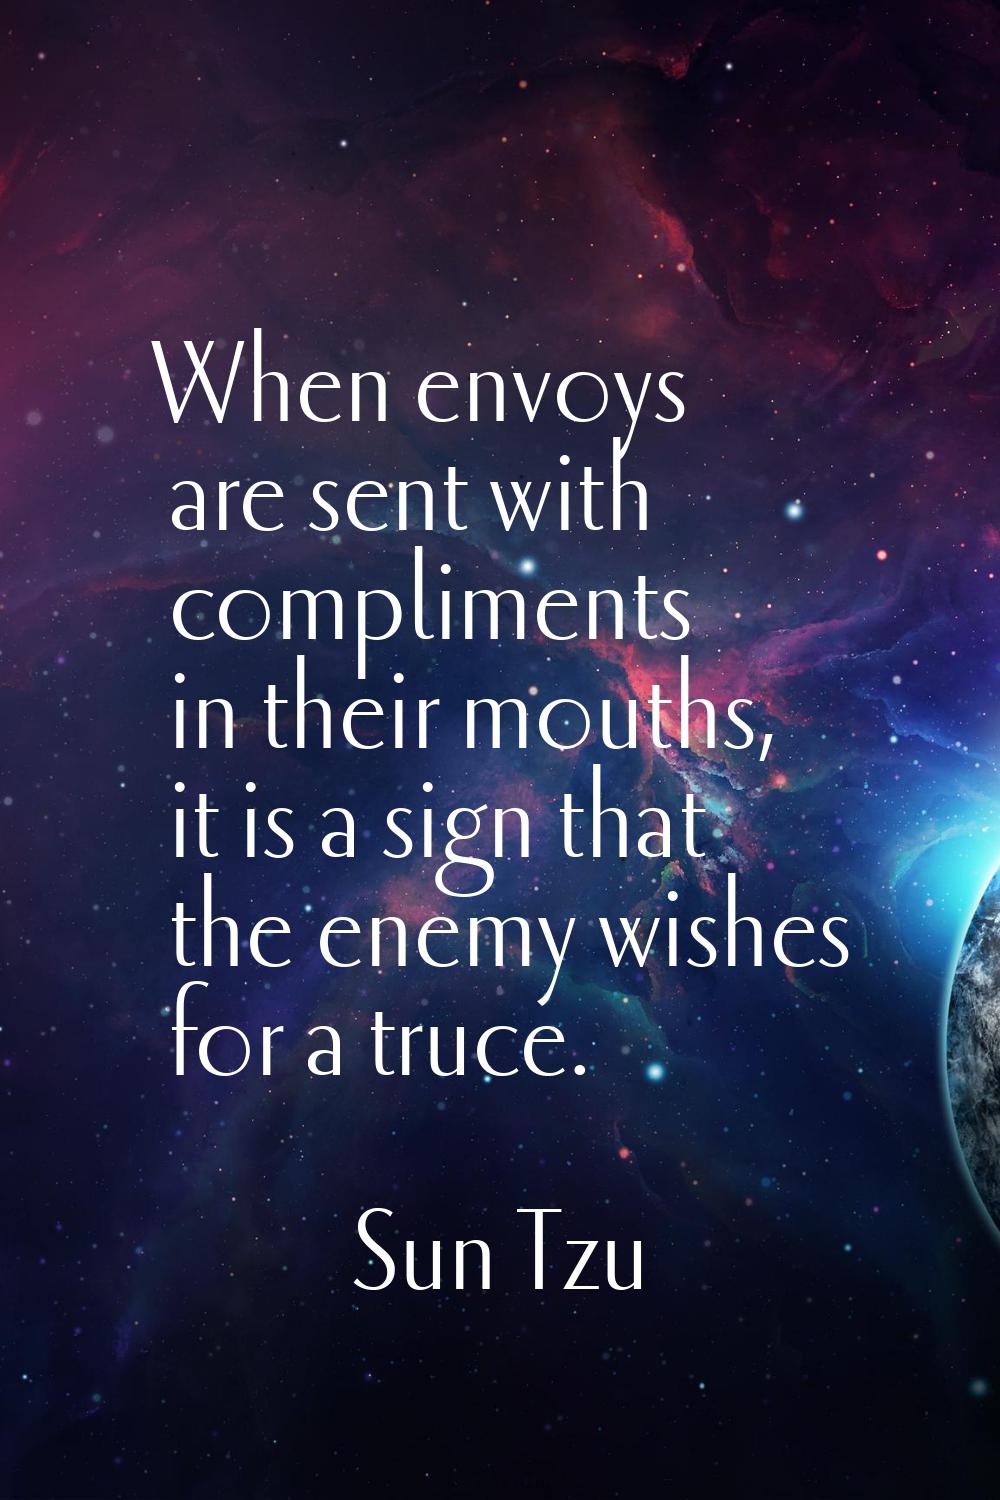 When envoys are sent with compliments in their mouths, it is a sign that the enemy wishes for a tru